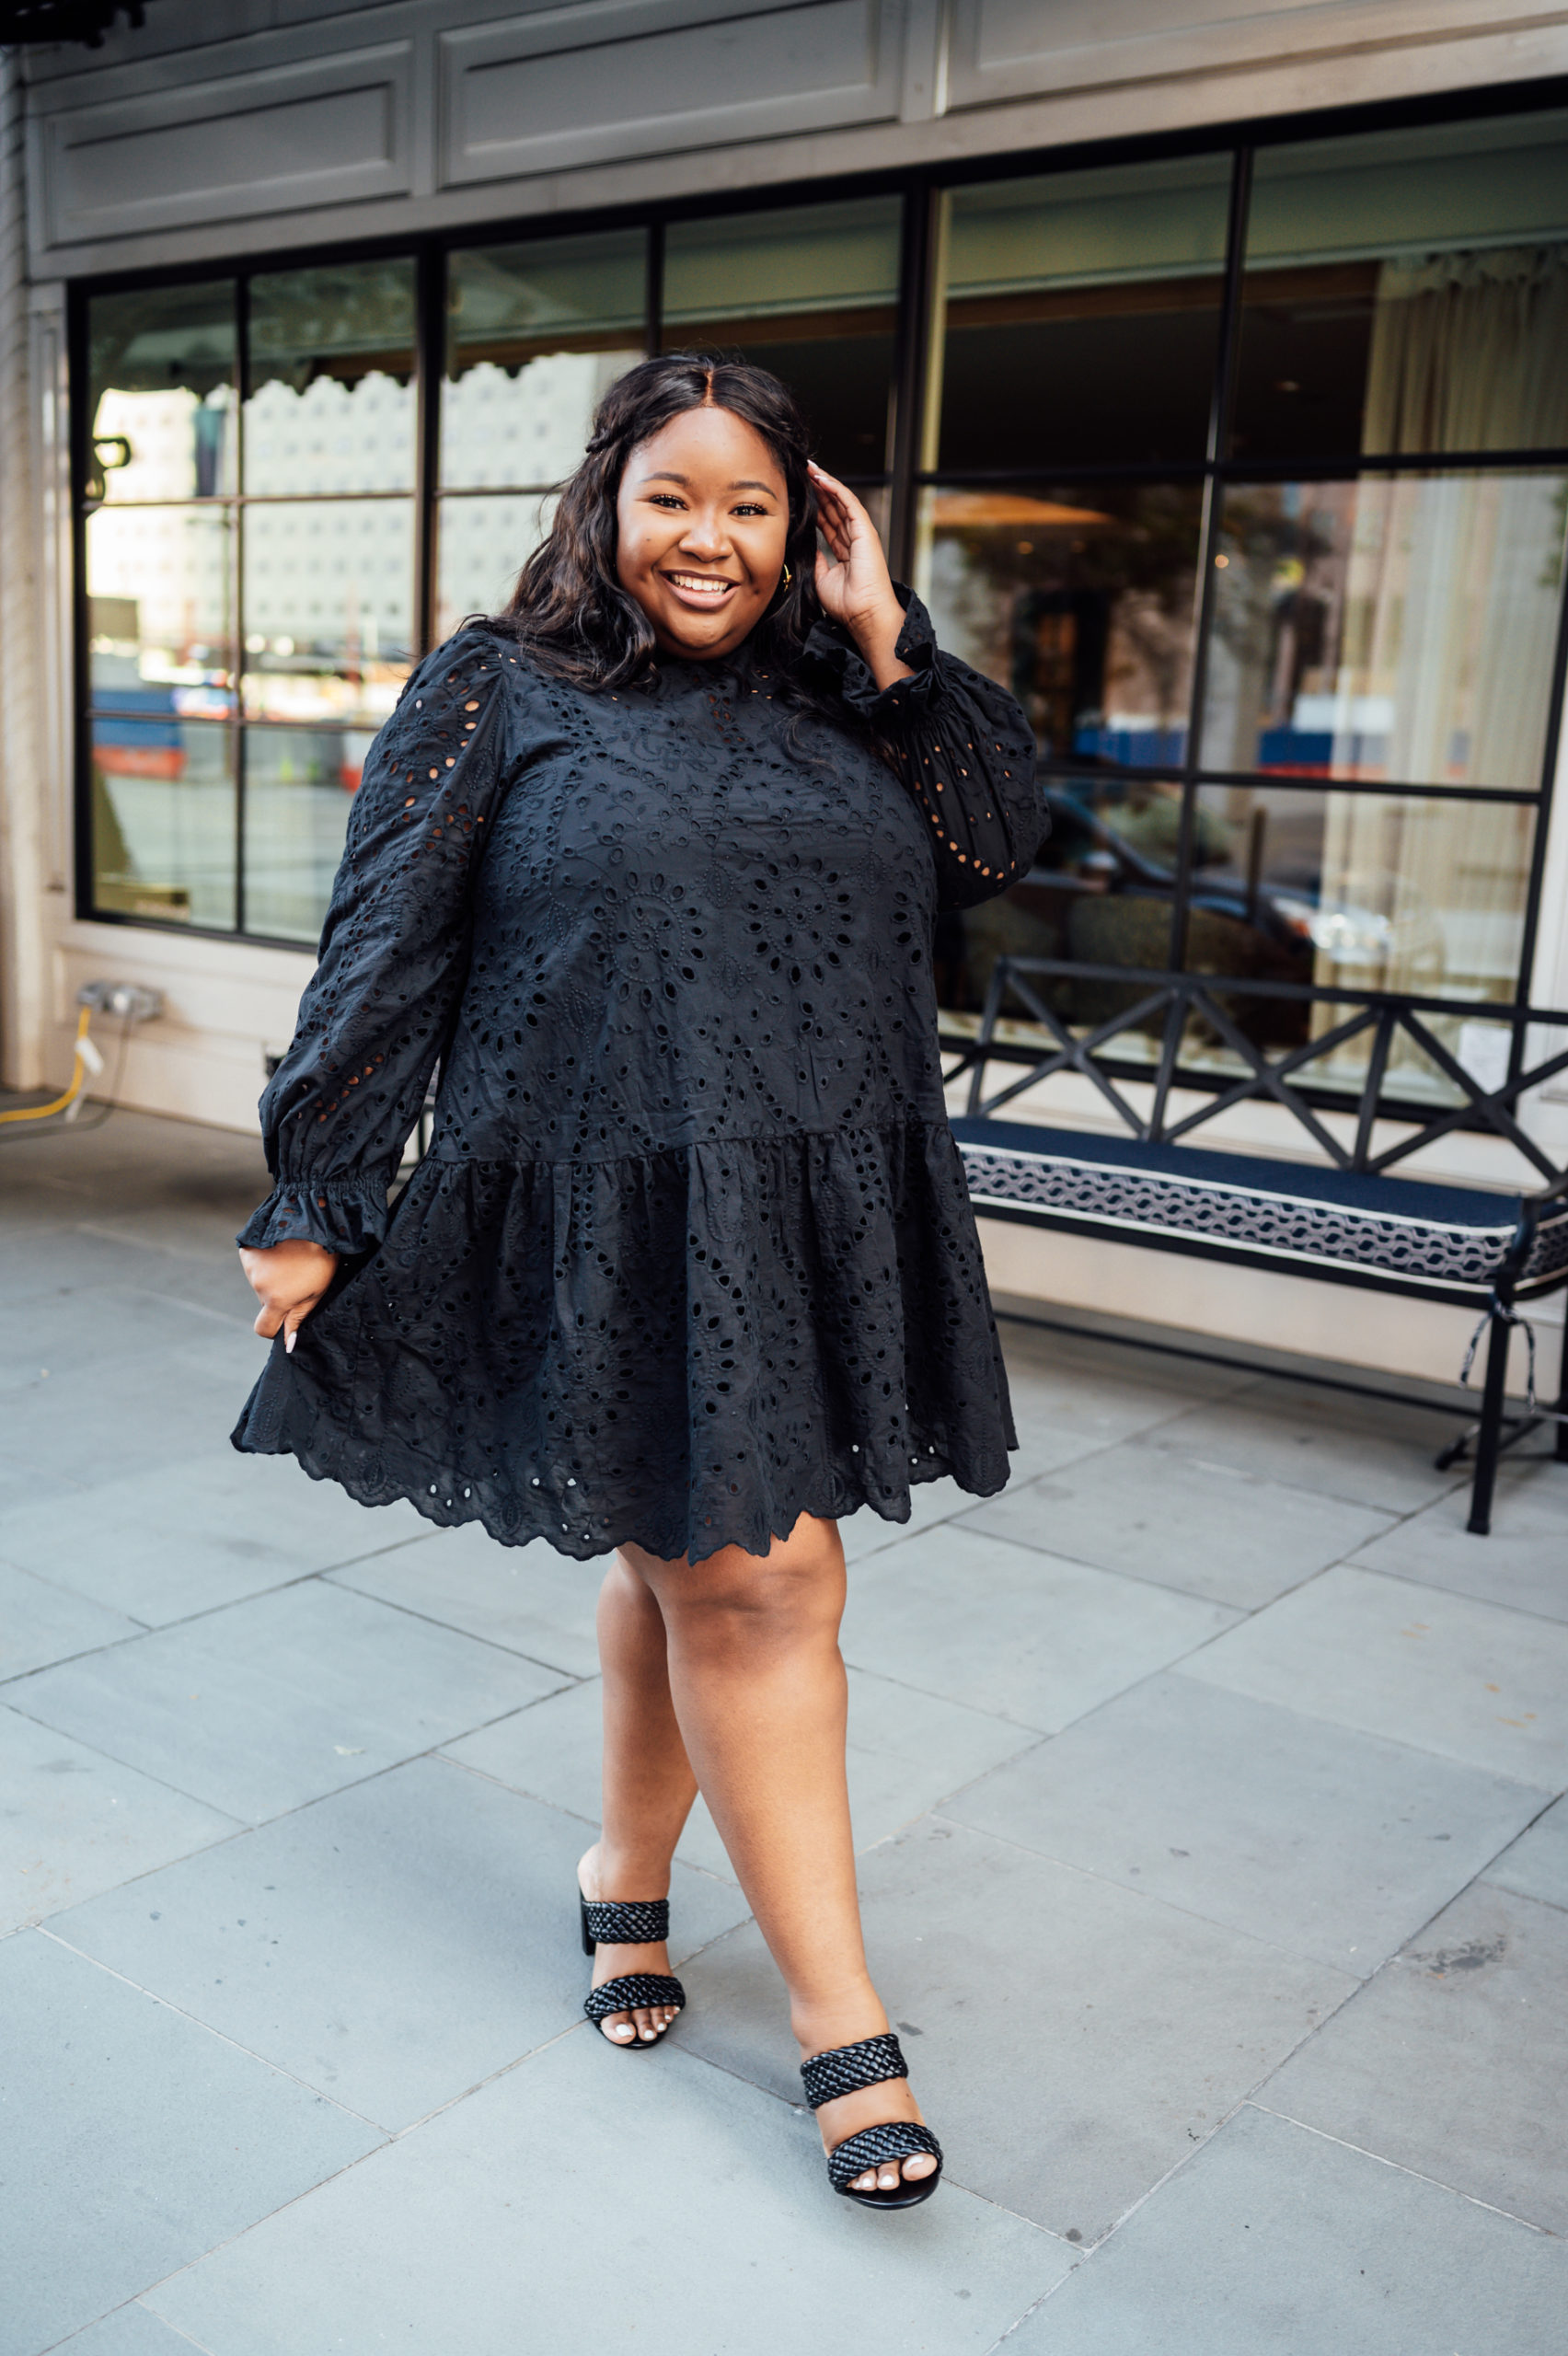 Try this plus size dress for your date night outfit - From Head To